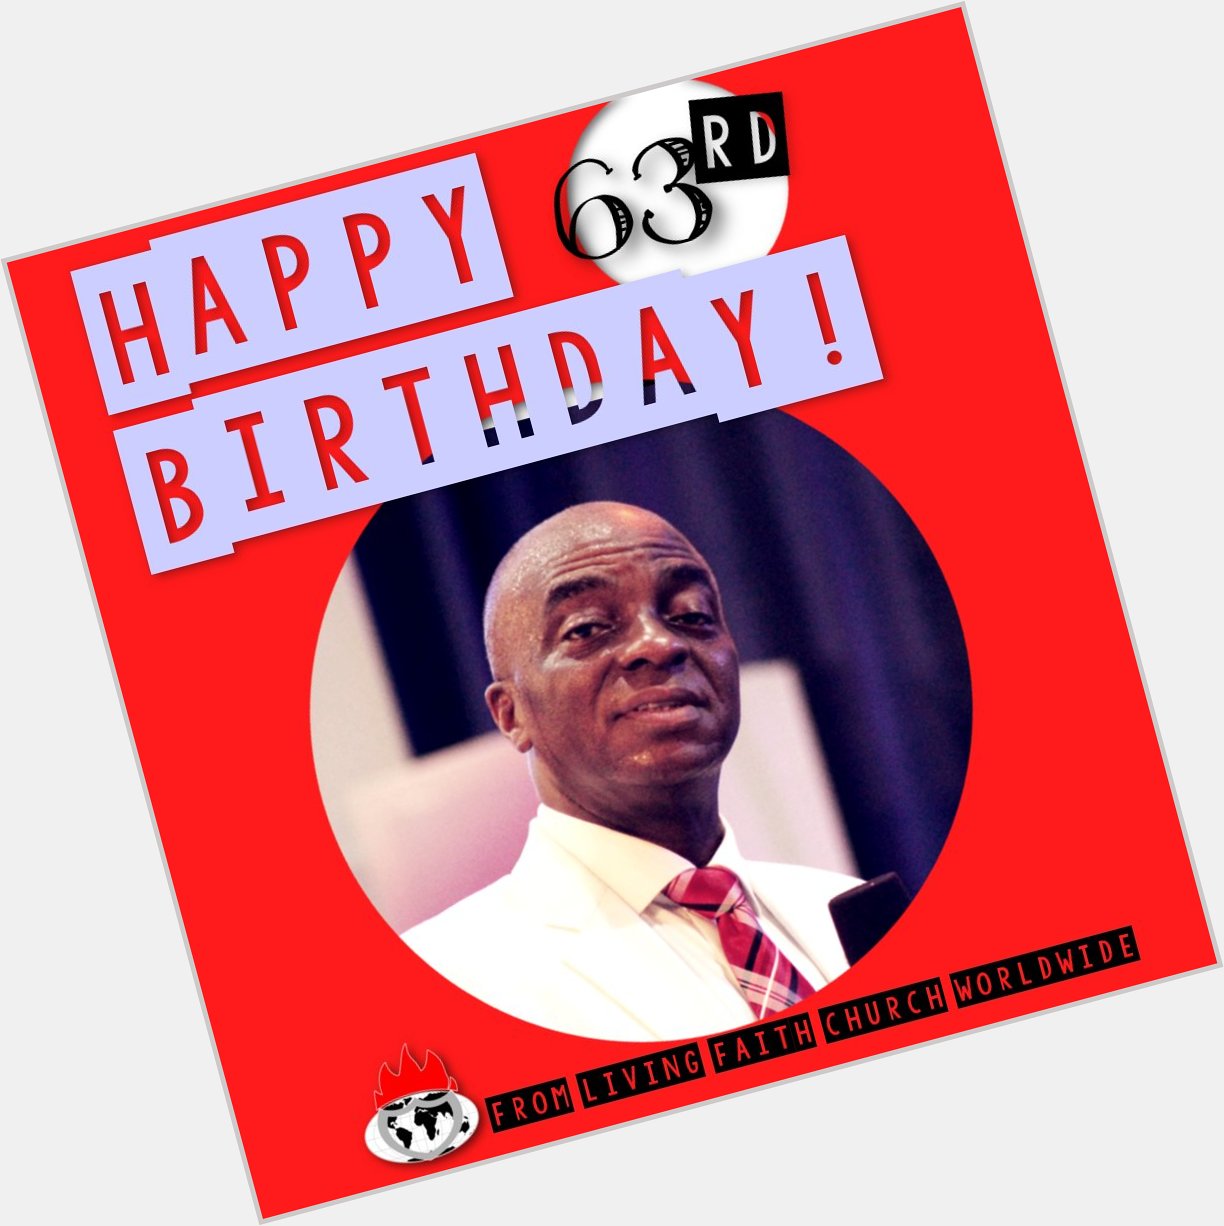 HAPPY 63RD BIRTHDAY to our Father and Prophet - Bishop David Oyedepo!
Fresh oil in Jesus\ name! 